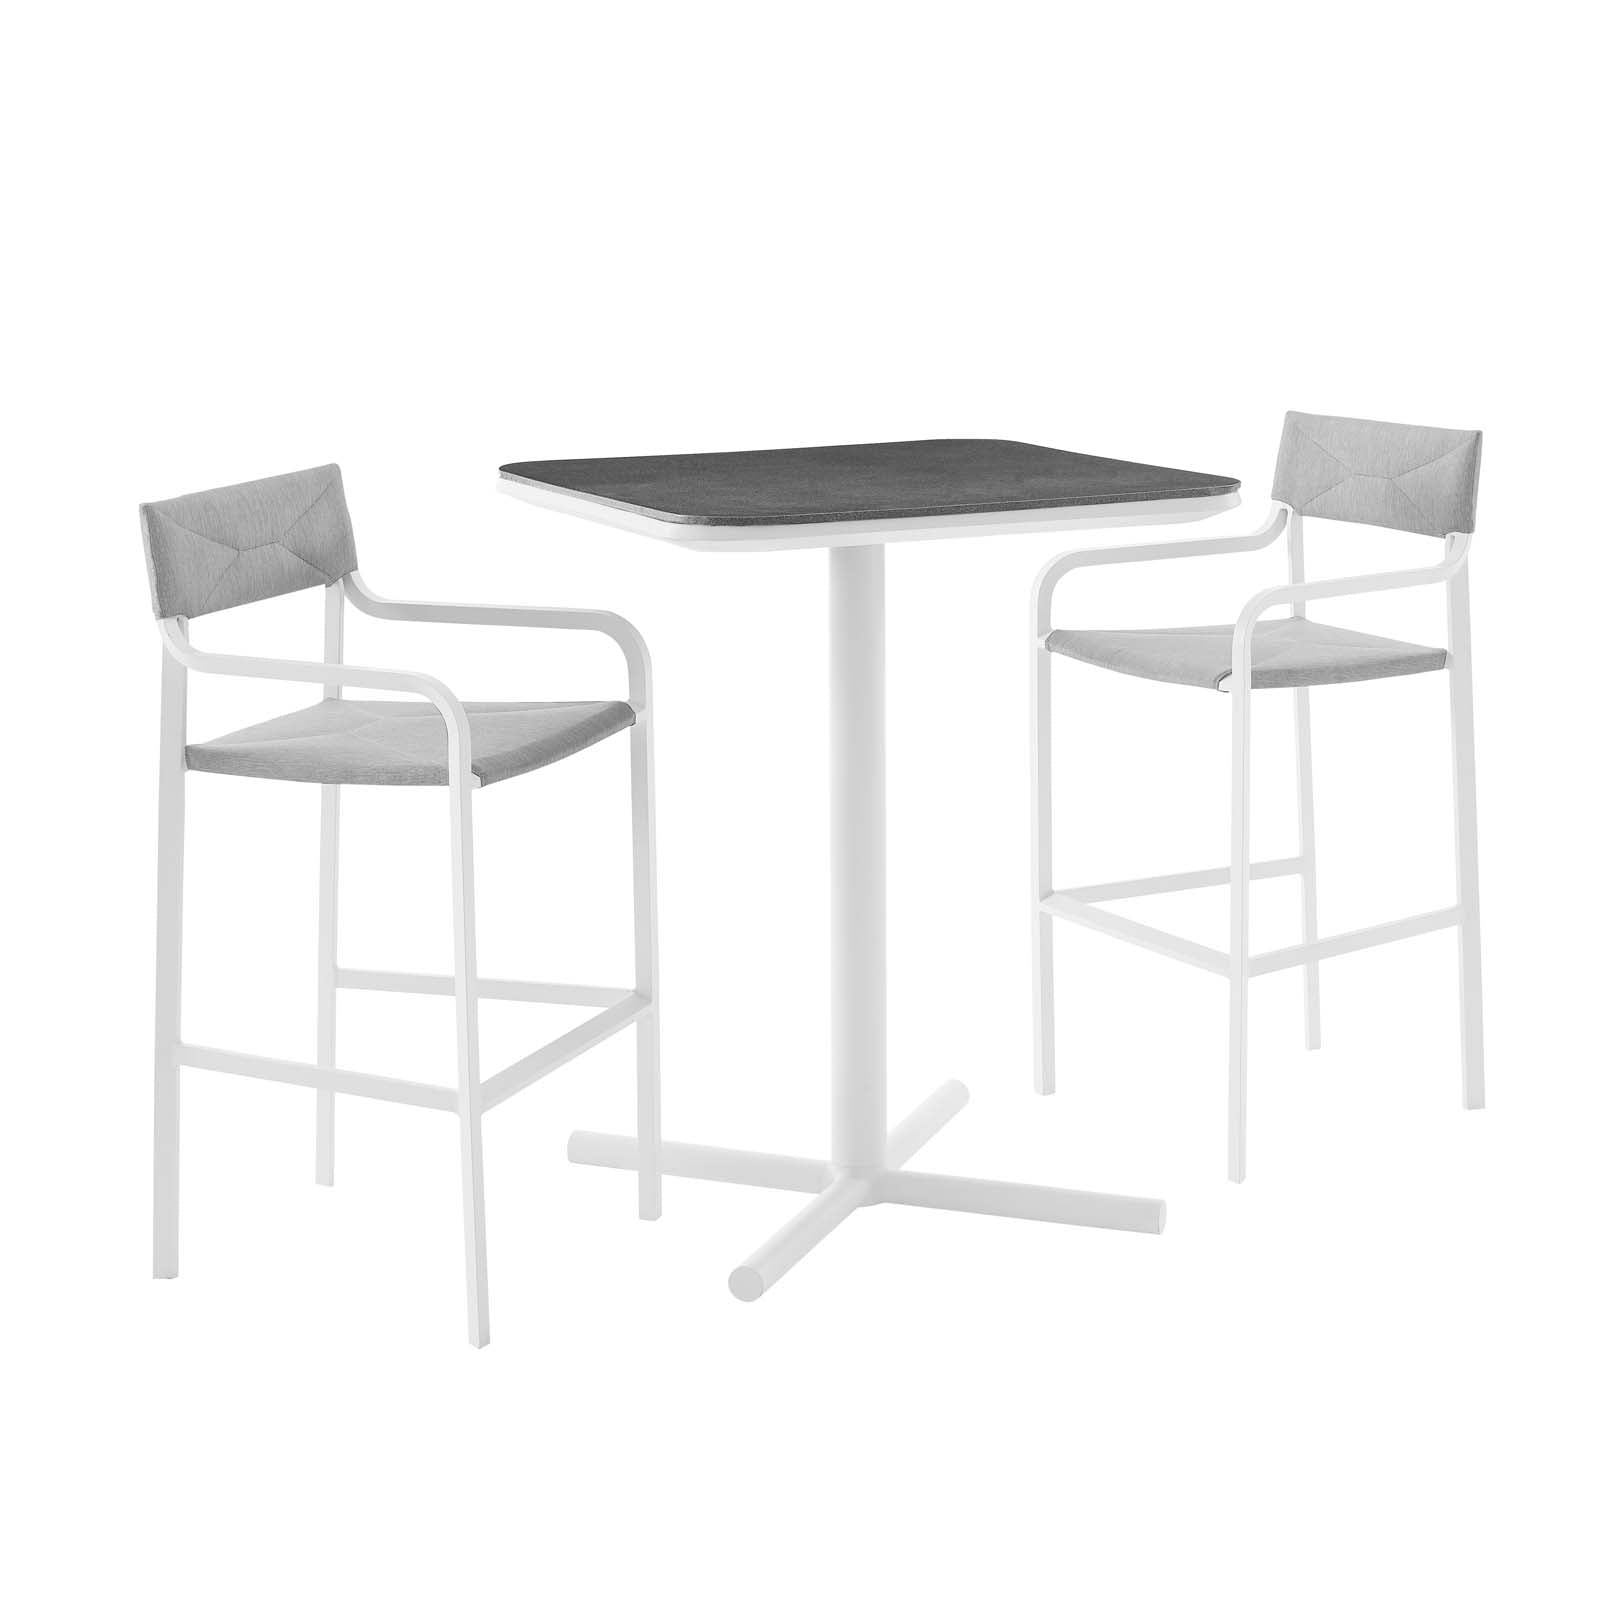 Modway Outdoor Dining Sets - Raleigh 3 Piece Outdoor Patio Aluminum Bar Set White Gray